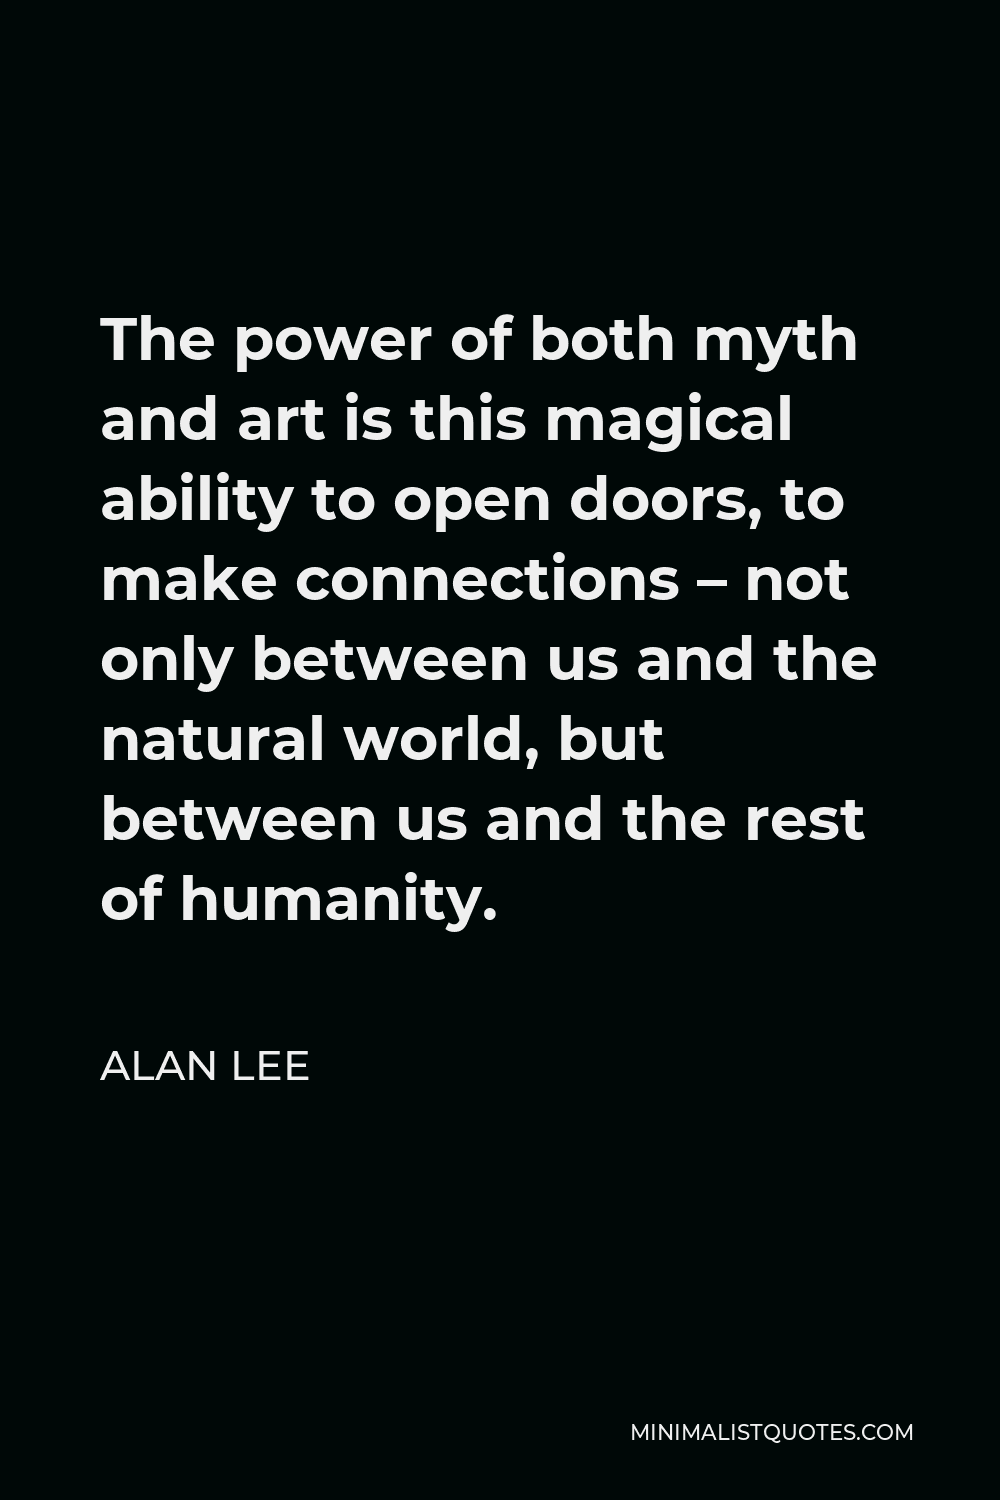 Alan Lee Quote - The power of both myth and art is this magical ability to open doors, to make connections – not only between us and the natural world, but between us and the rest of humanity.